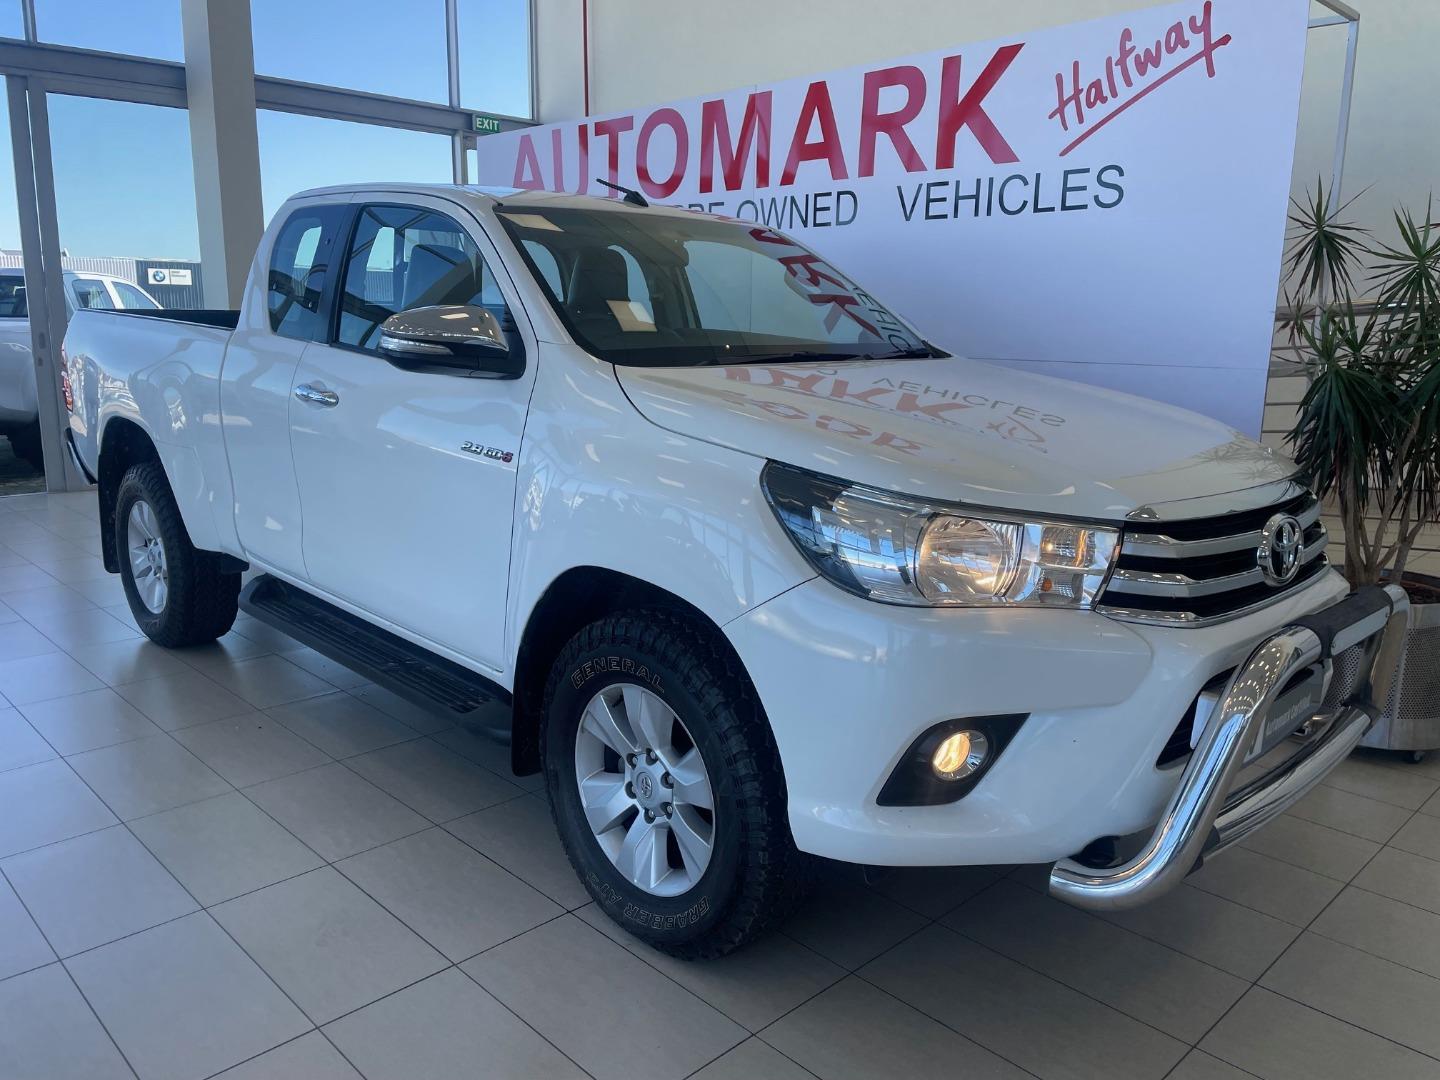 2016 Toyota Hilux 2.8GD-6 Xtra cab Raider For Sale